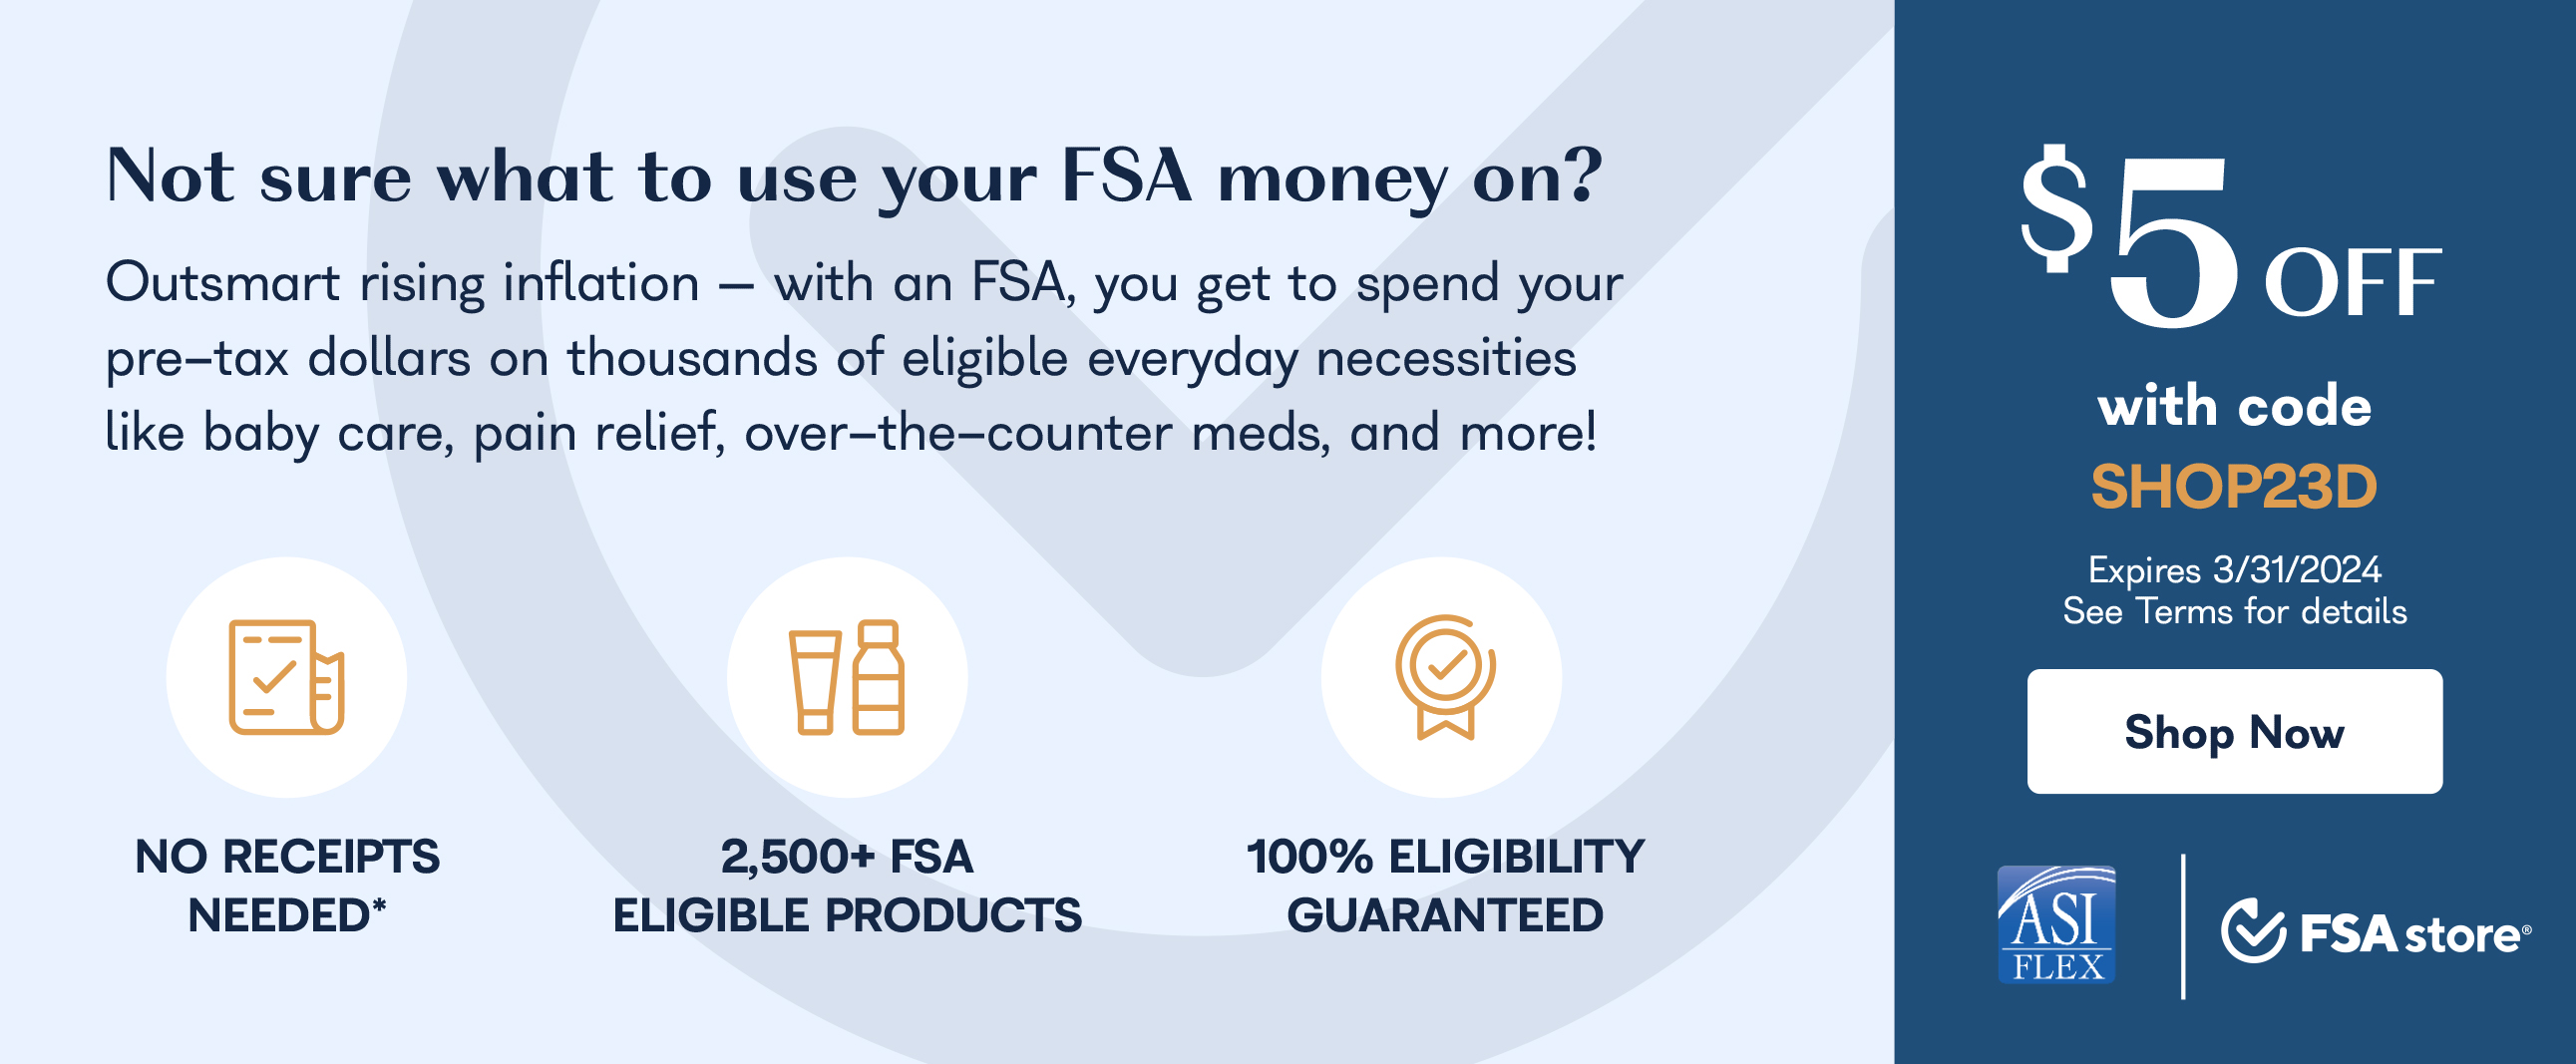 14 Things to Buy With Your FSA Money Before It Runs Out - CNET